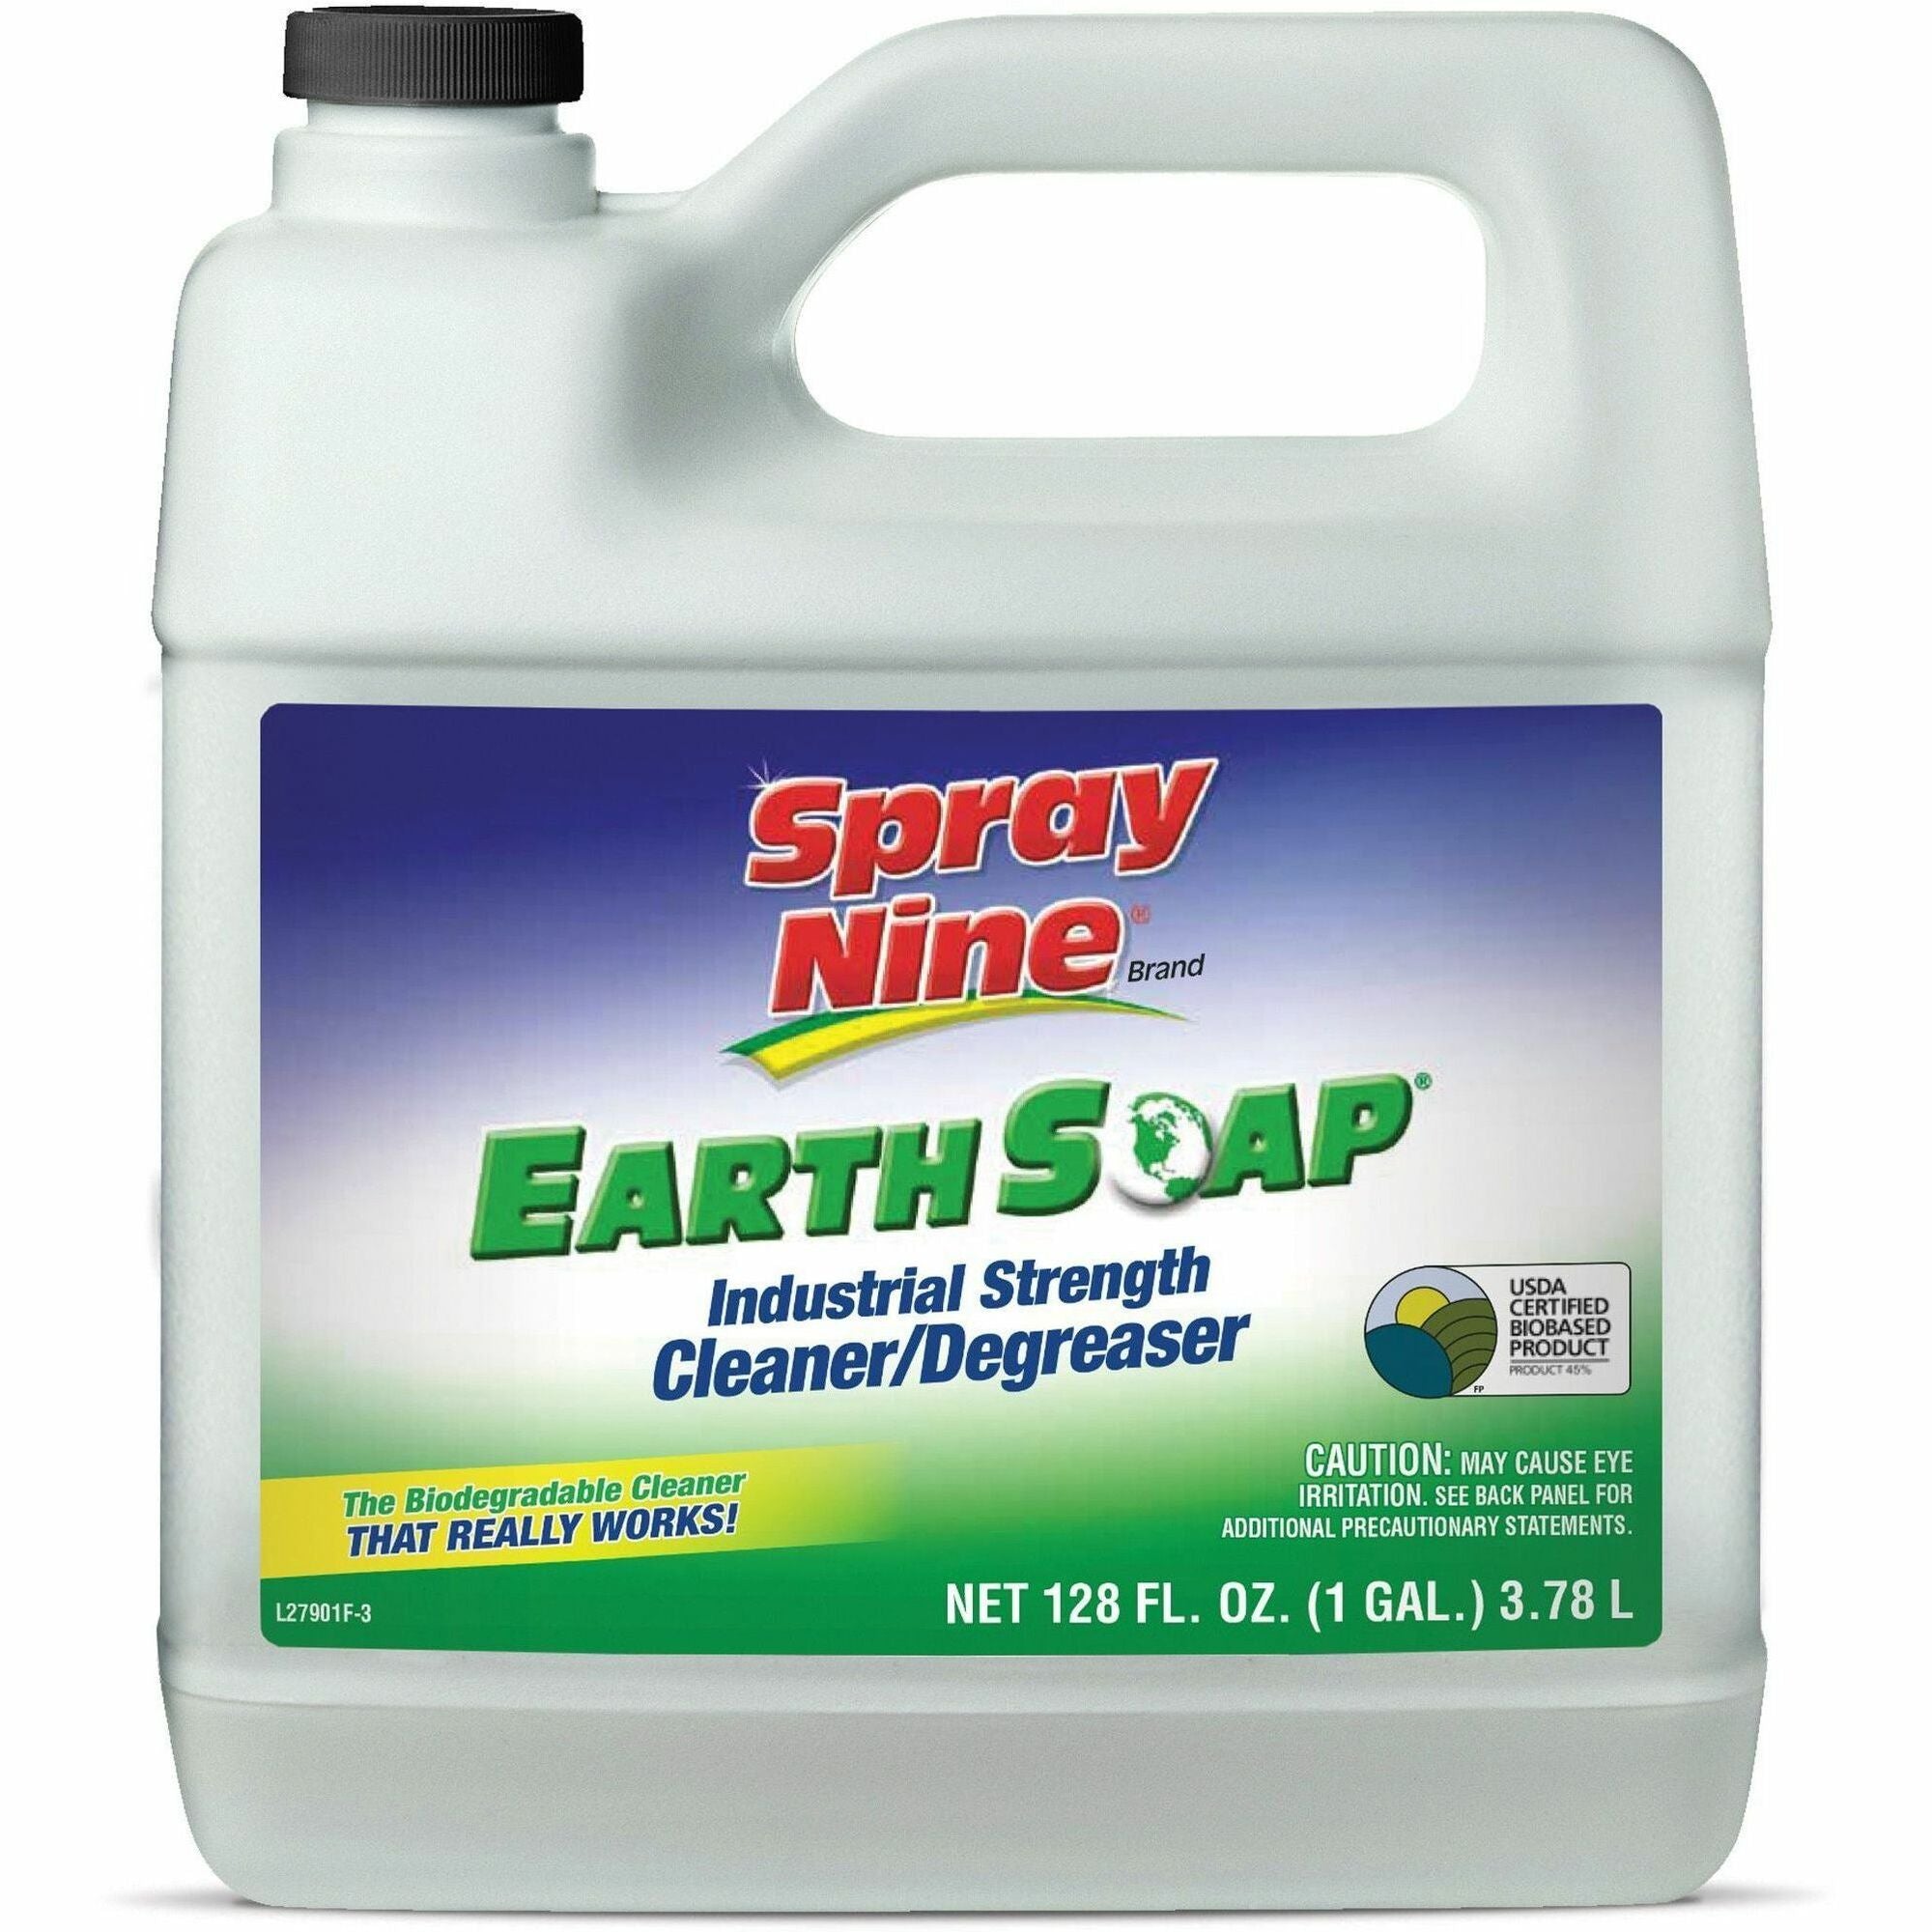 Spray Nine Earth Soap Cleaner/Degreaser - For Tool, Metal Surface, Countertop, Floor - Concentrate - 128 fl oz (4 quart) - 1 Each - Solvent-free, Phosphate-free, Chemical-free - Clear - 